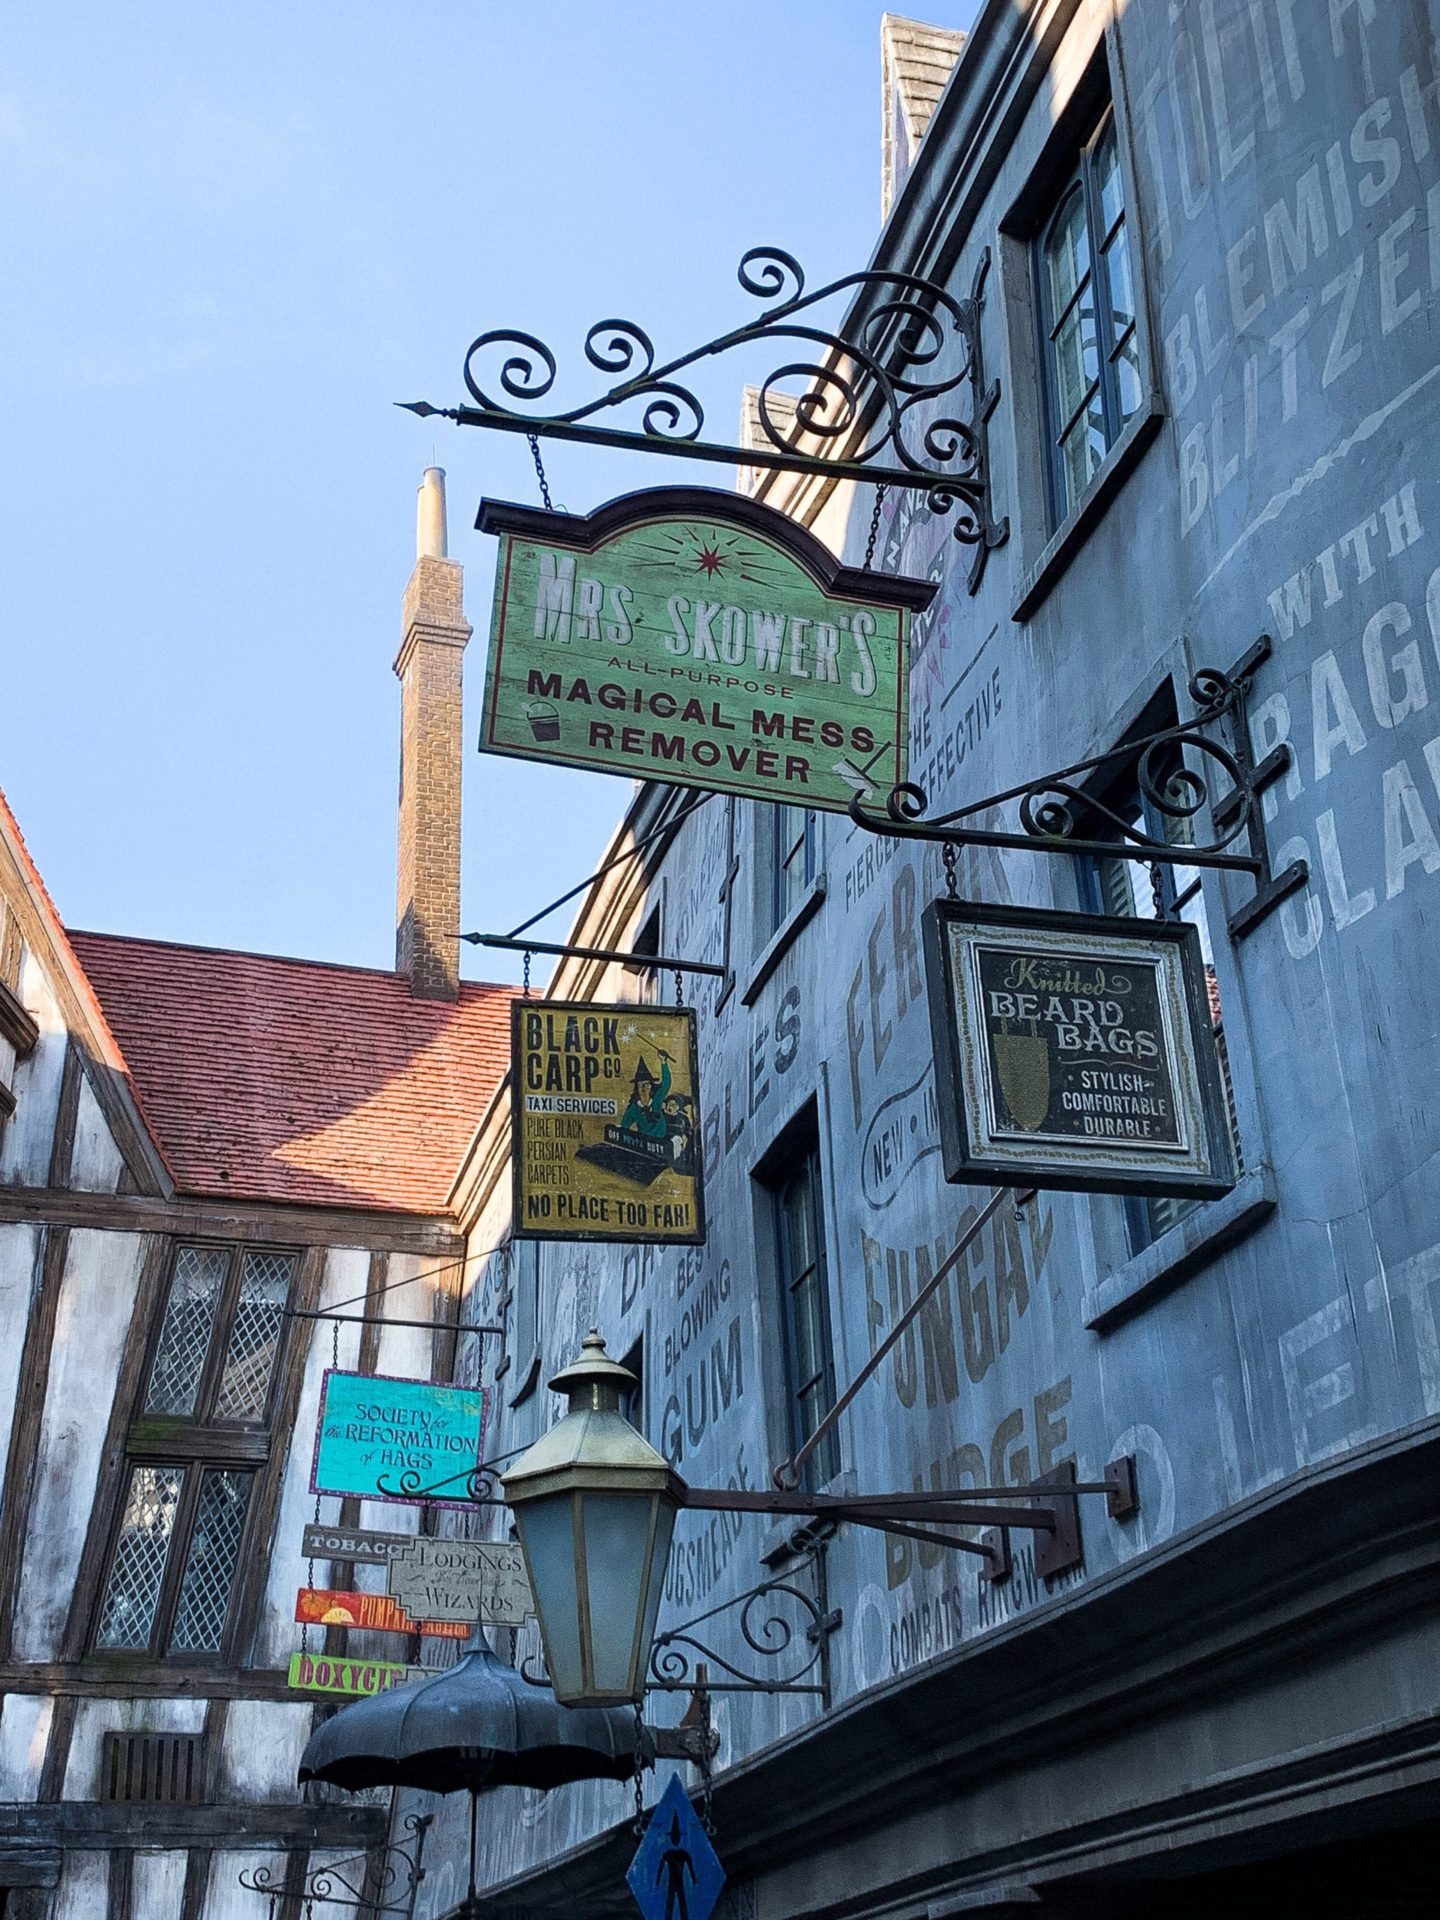 Diagon Alley street signs